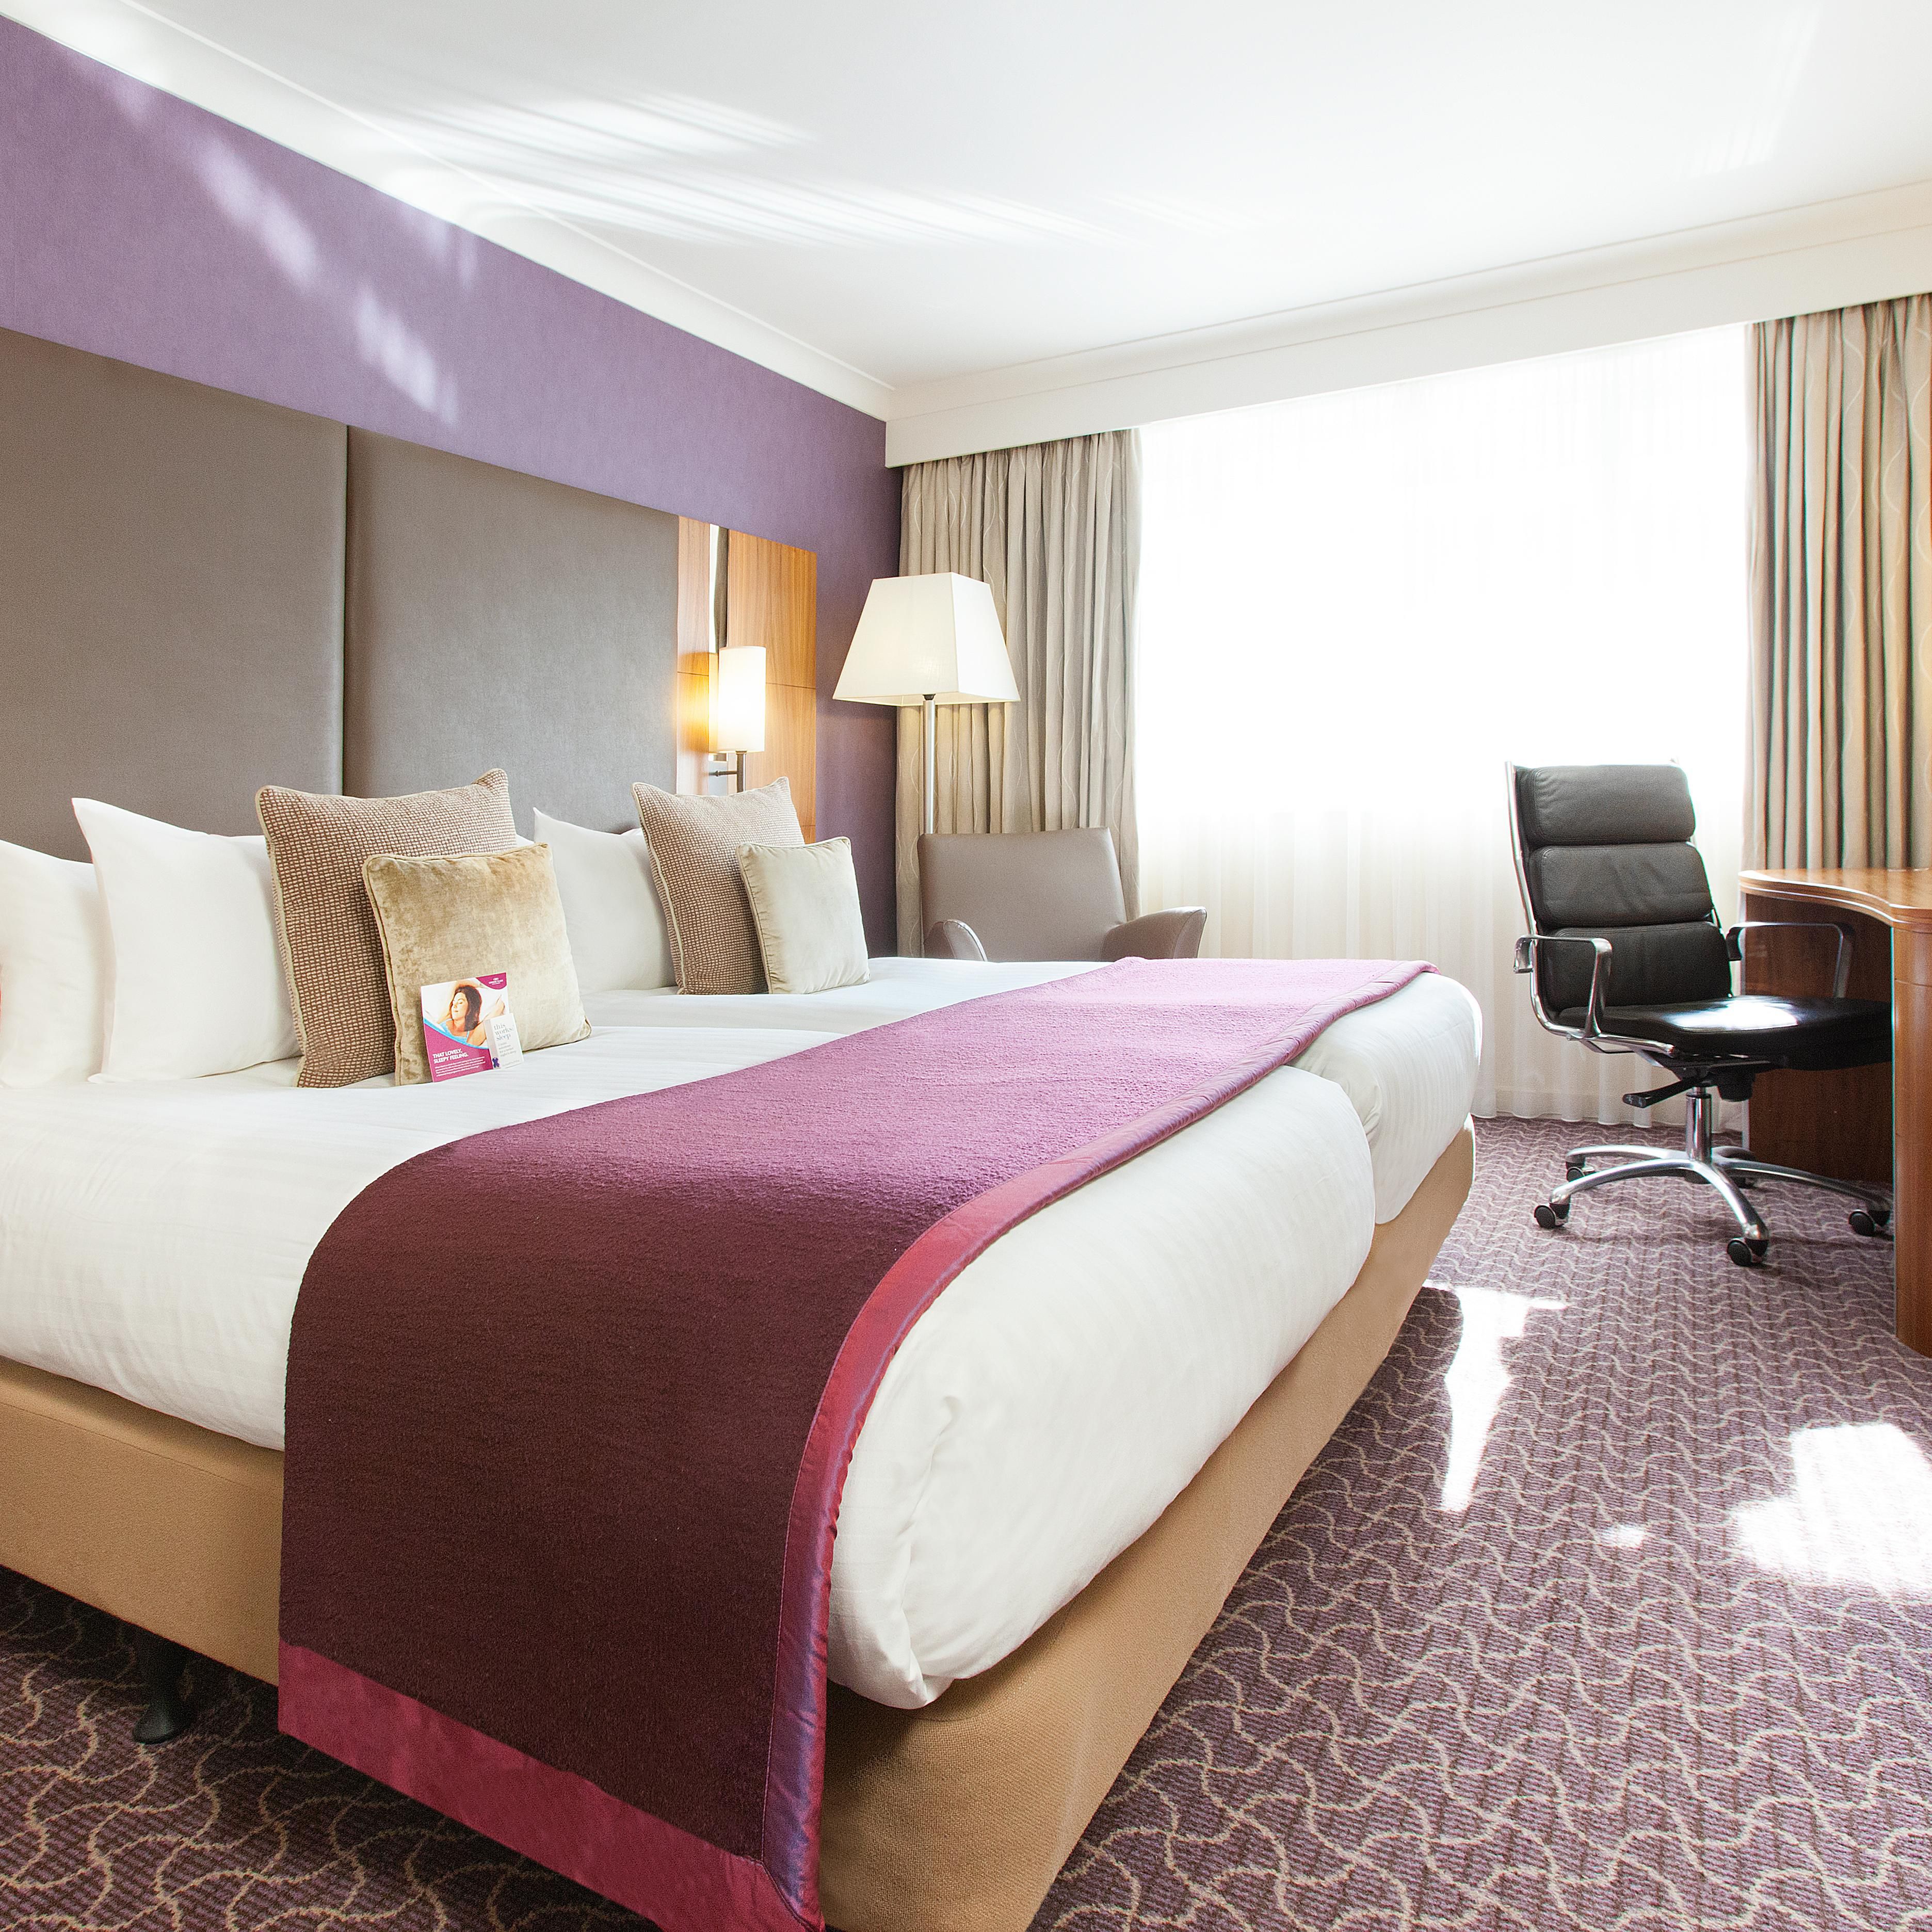 Executive room with either a double or 2 single beds